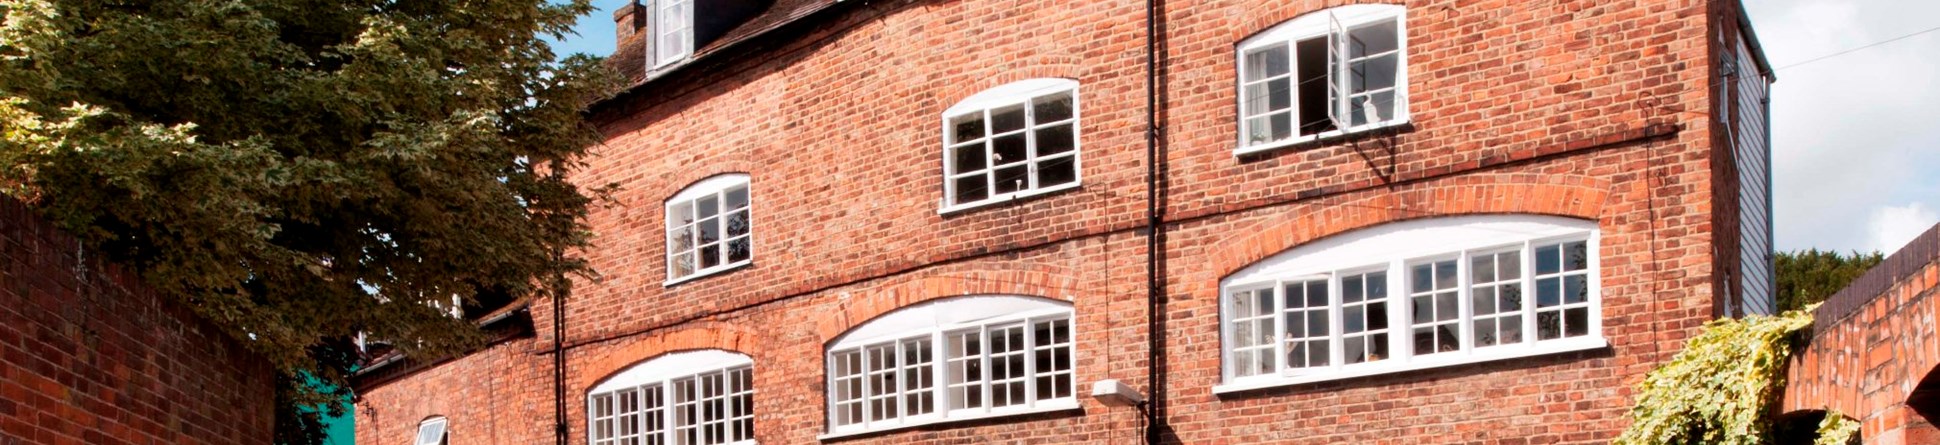 Red brick cottages used for knitting industry